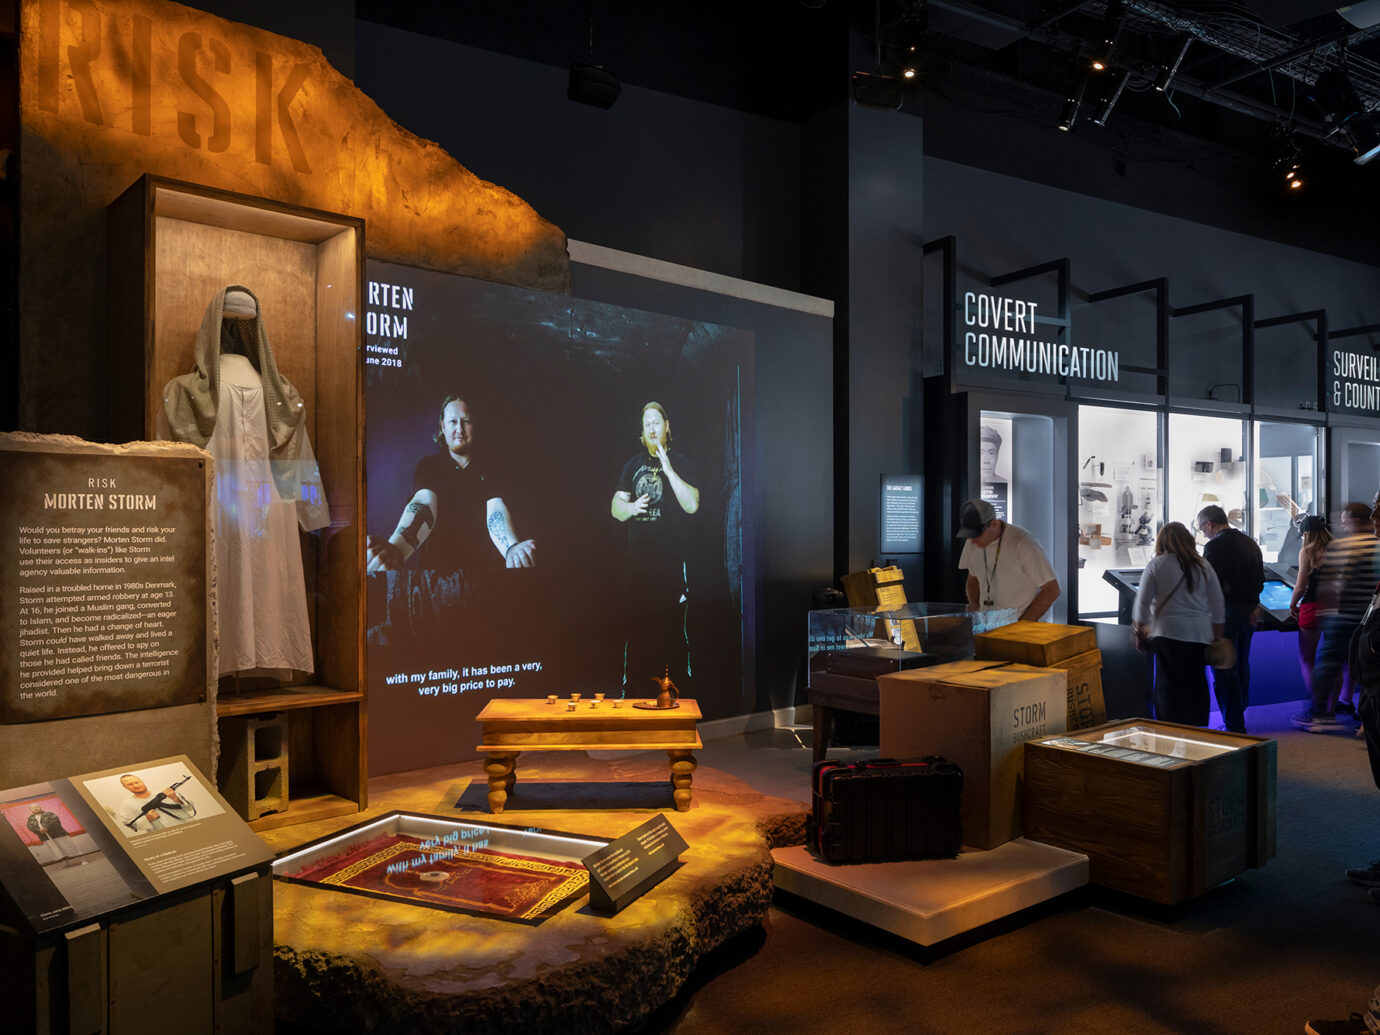 People begin their undercover mission in the Spies and Spy Masters Gallery where theatrical vignettes and walls of trade tools bring human intelligence stories to life.